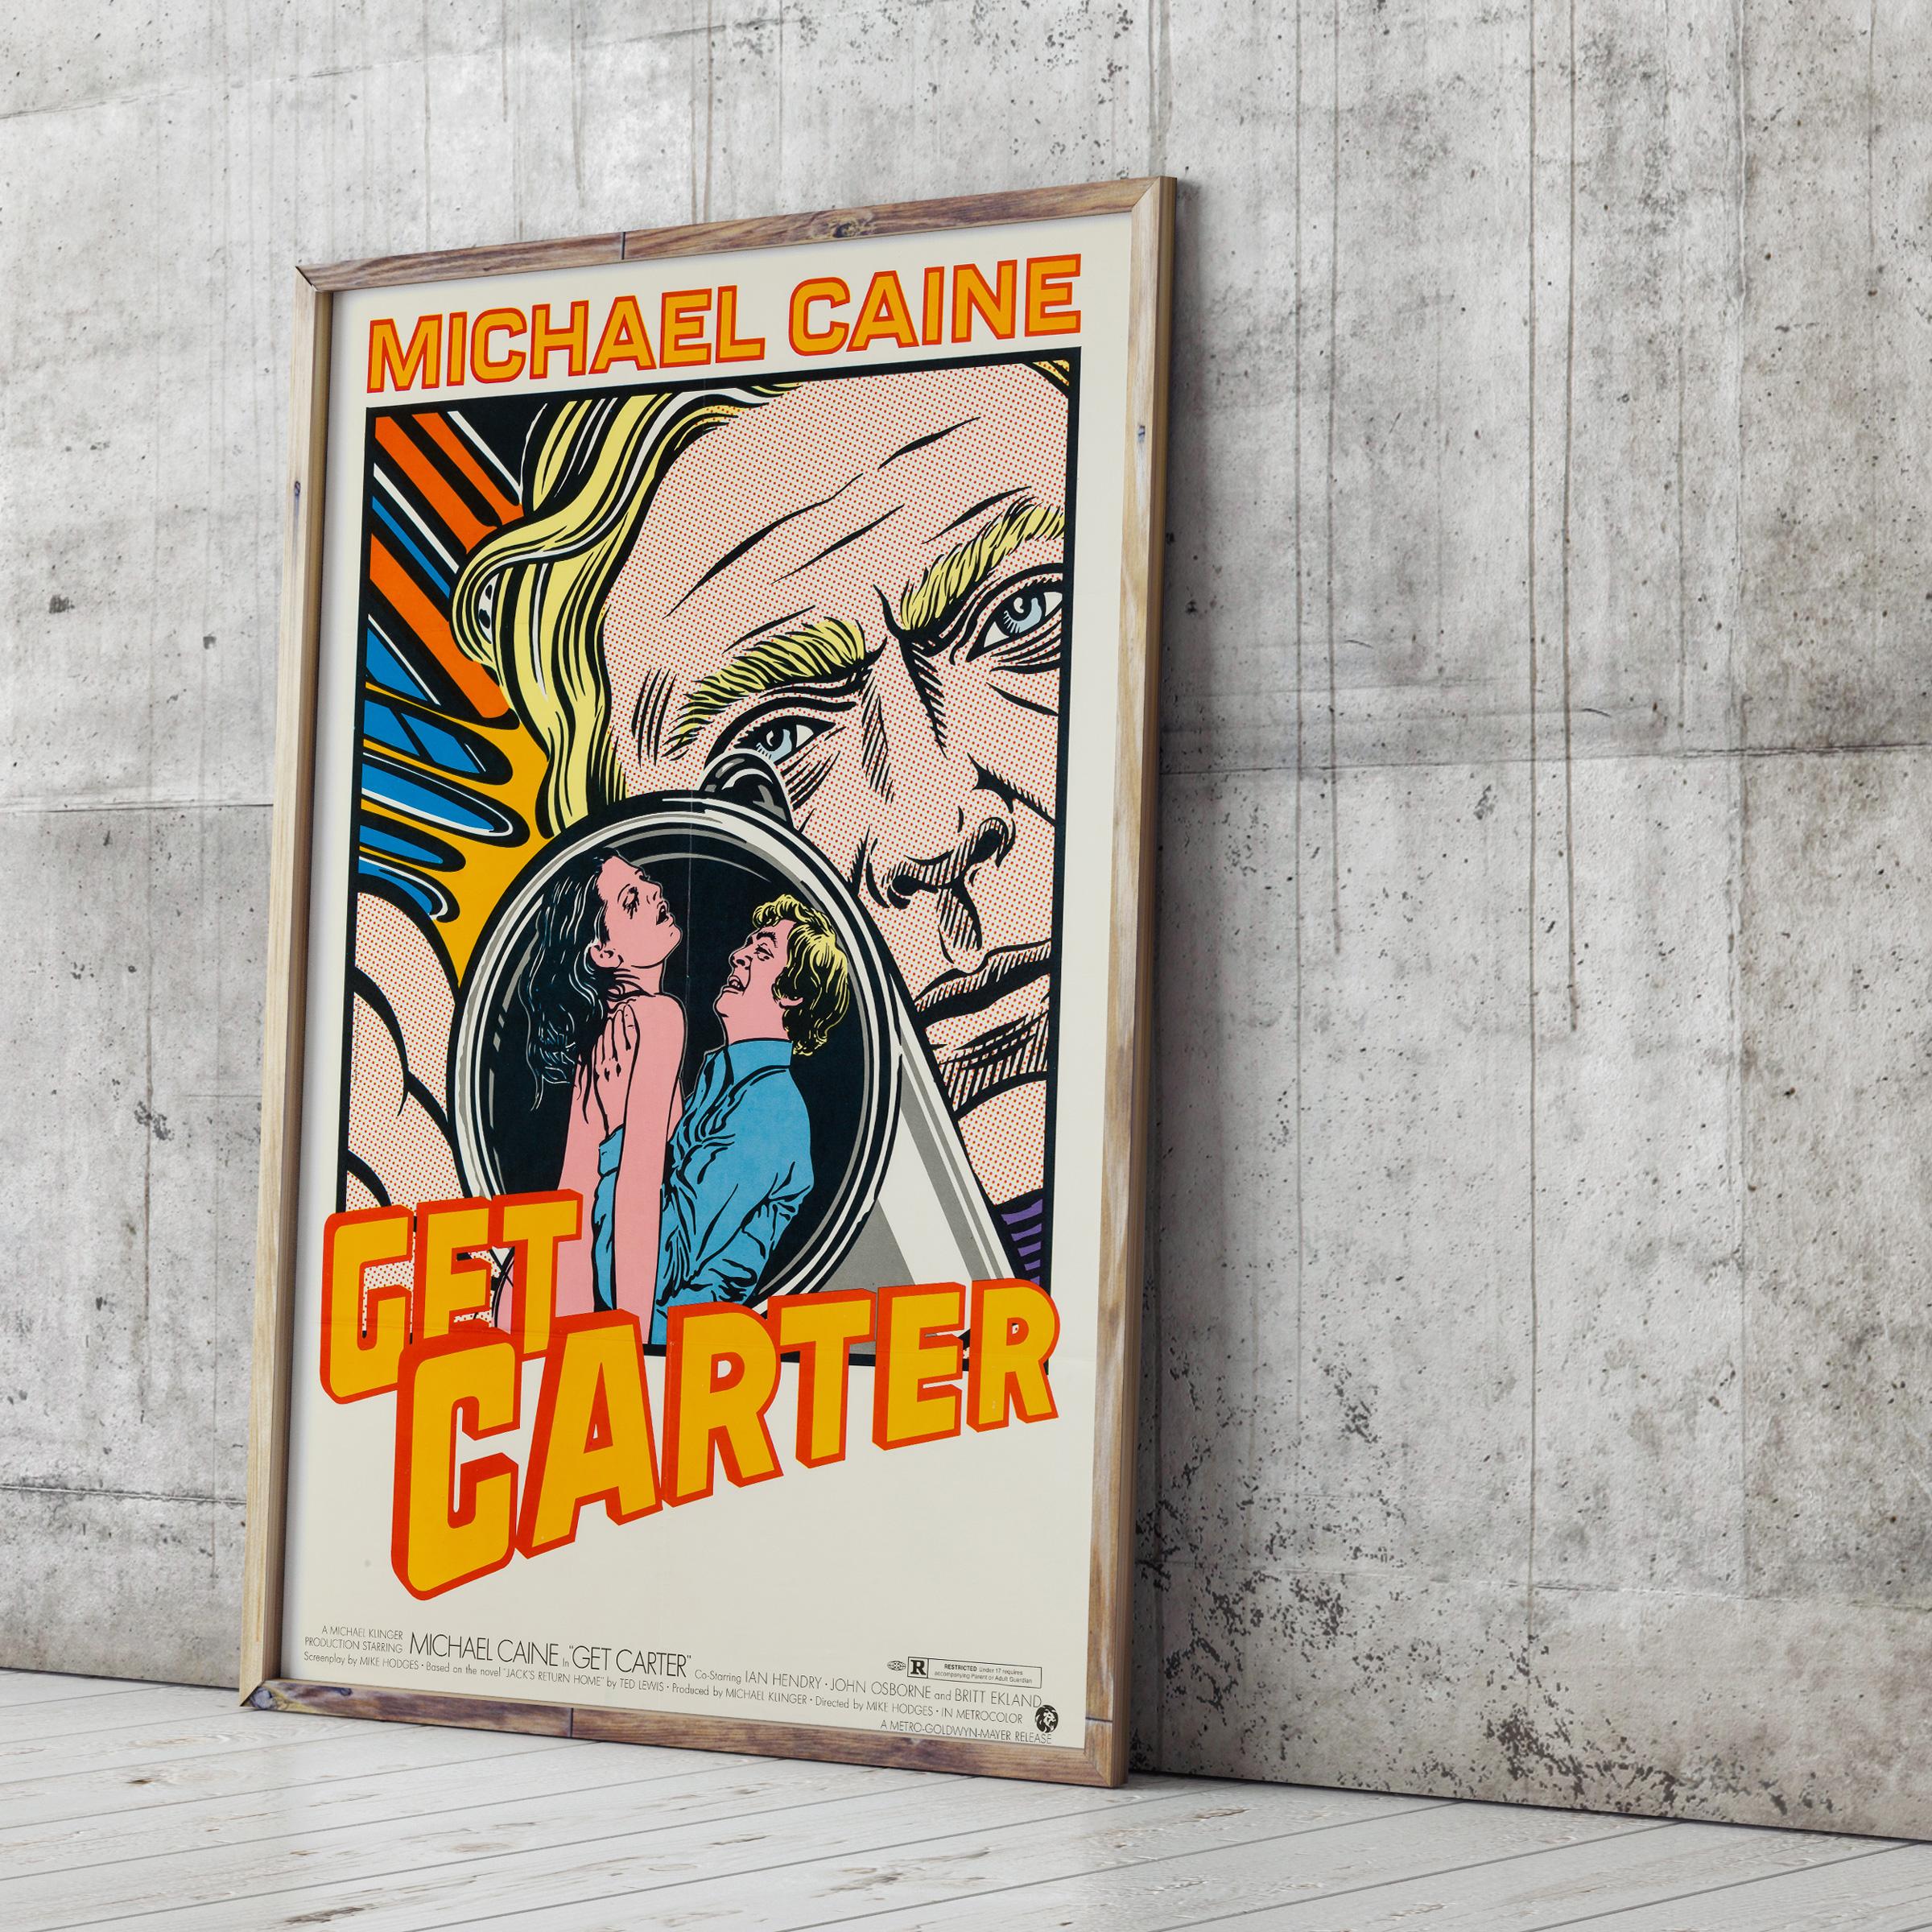 The super rare super amazing vintage Hamersveld Get Carter movie poster. Wonderful Lichtenstein inspired pop artwork. 

Actual film poster size 27 x 41 1/2 inches. Folded (as issued) but stored flat for a long time and folds softened. Will be sent